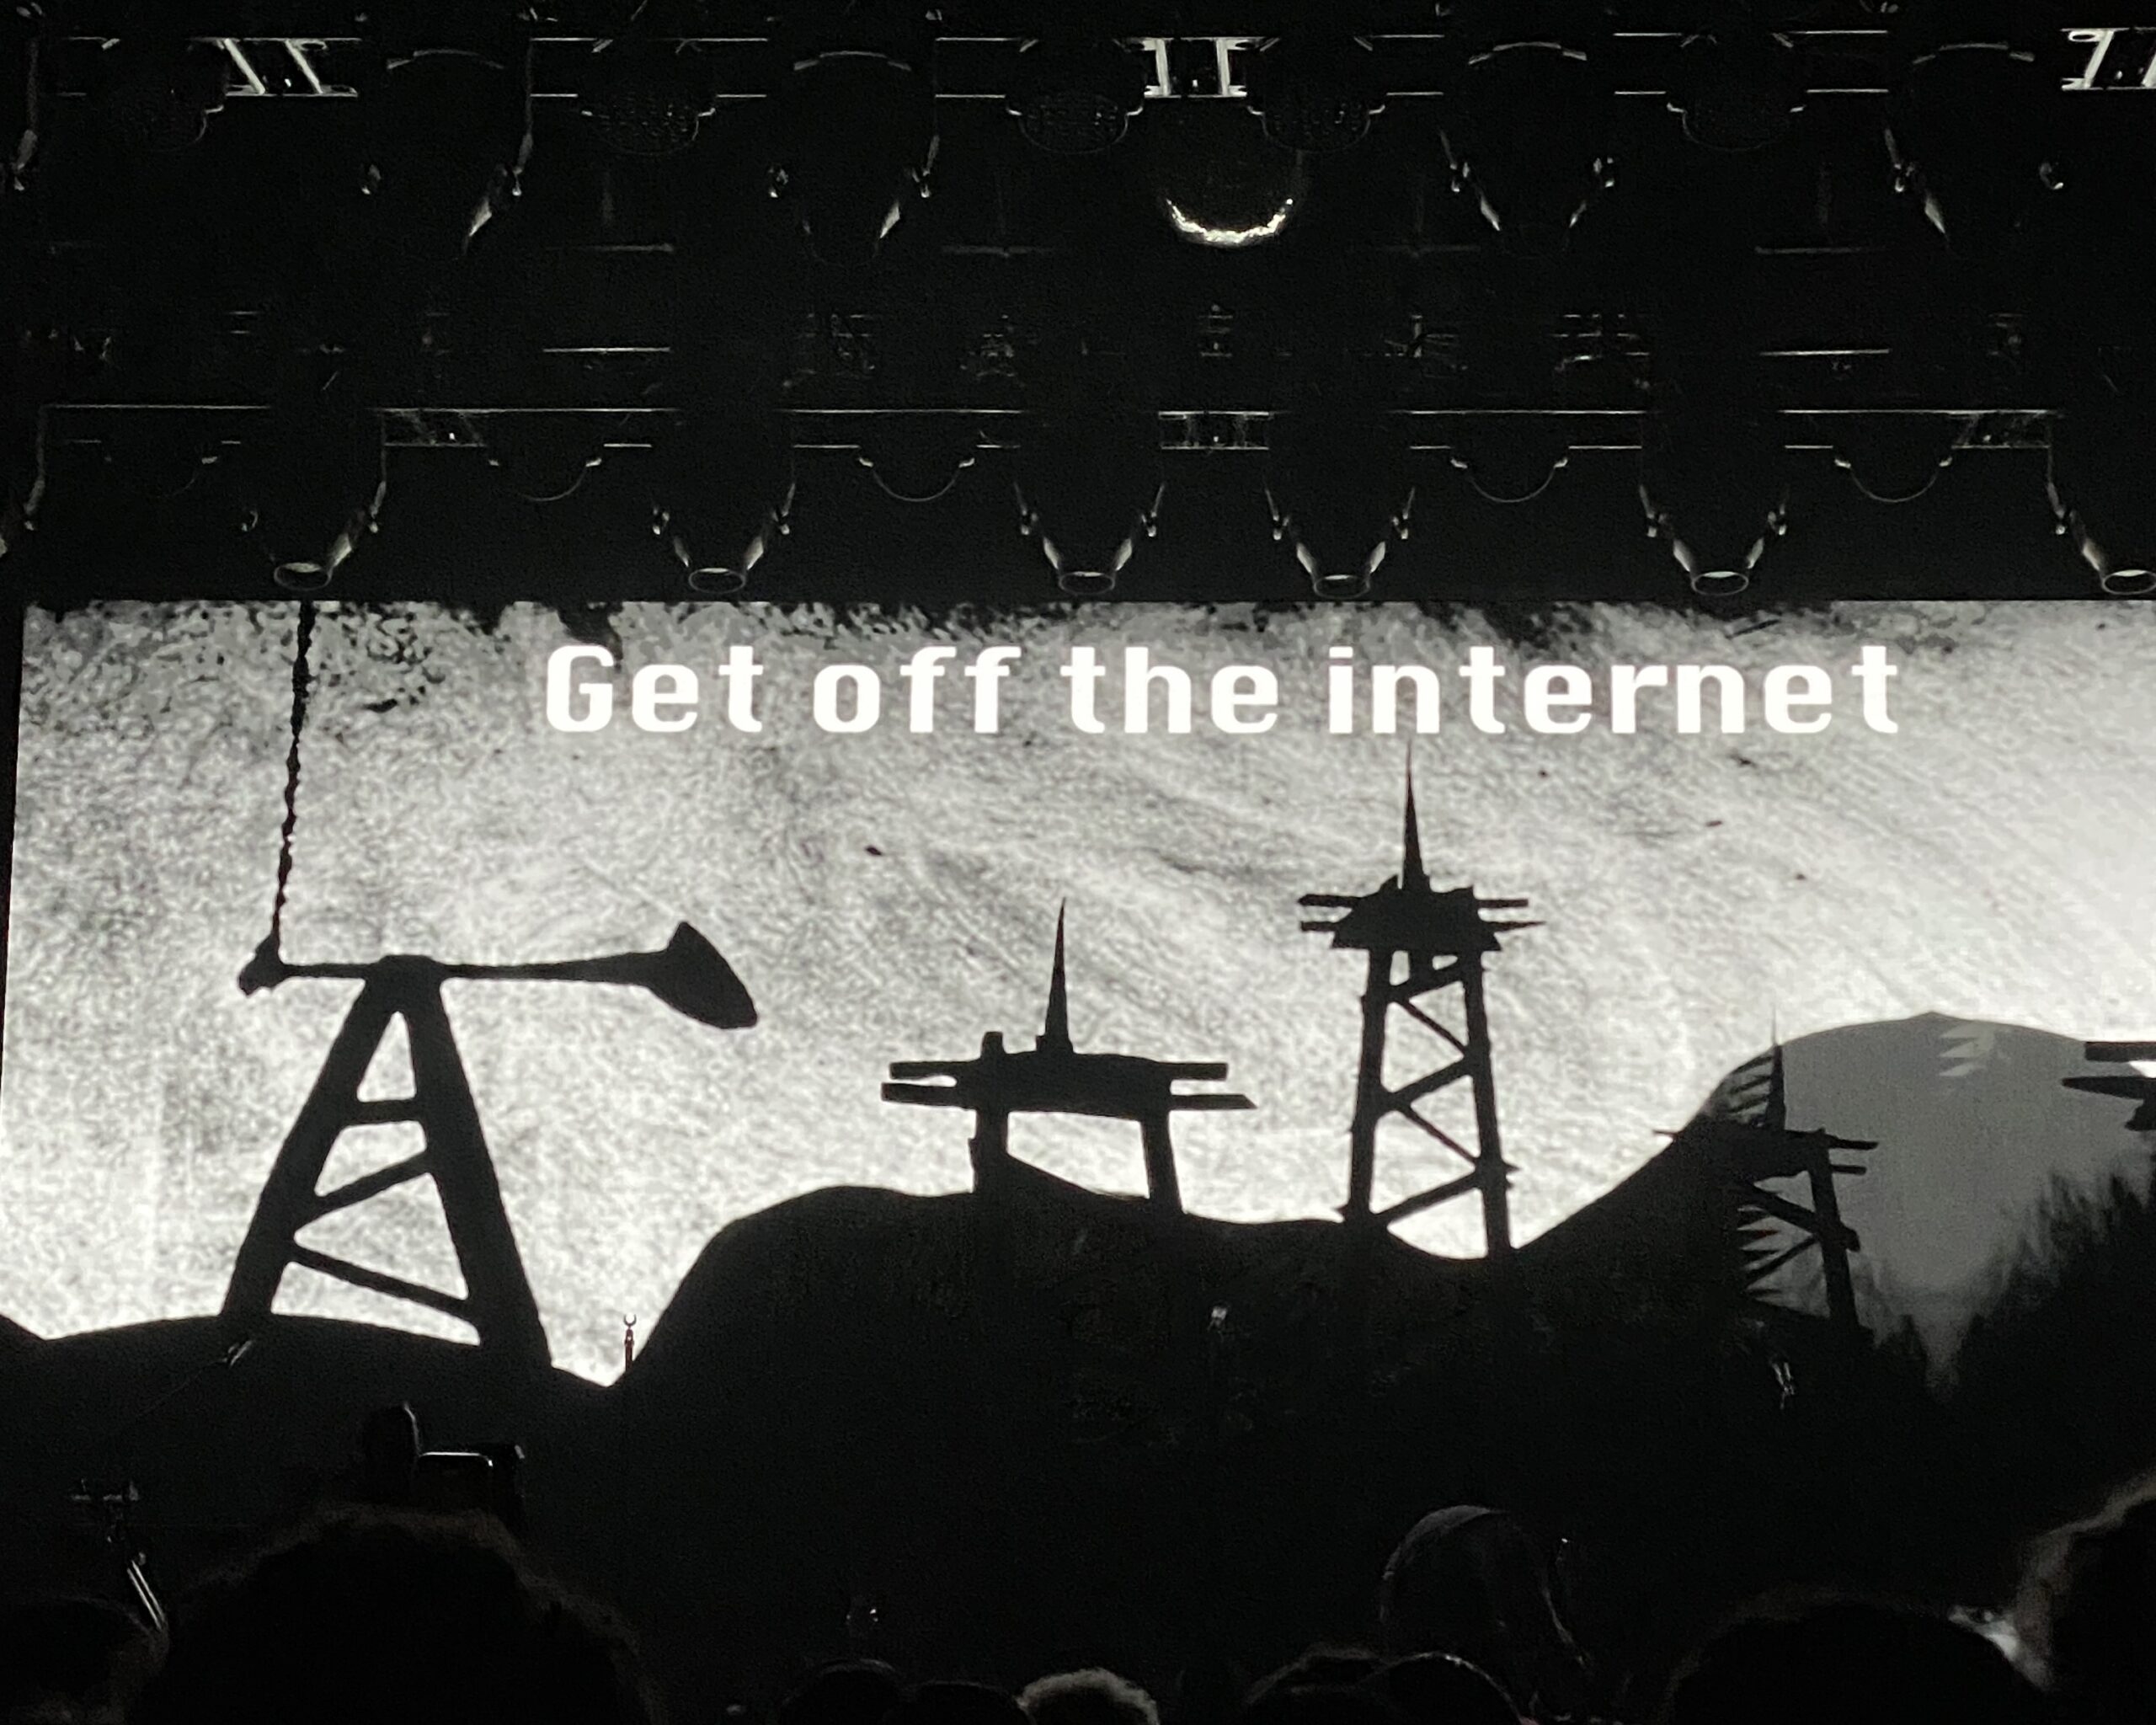 Screen at Le Tigre concert that says "Get Off The Internet"